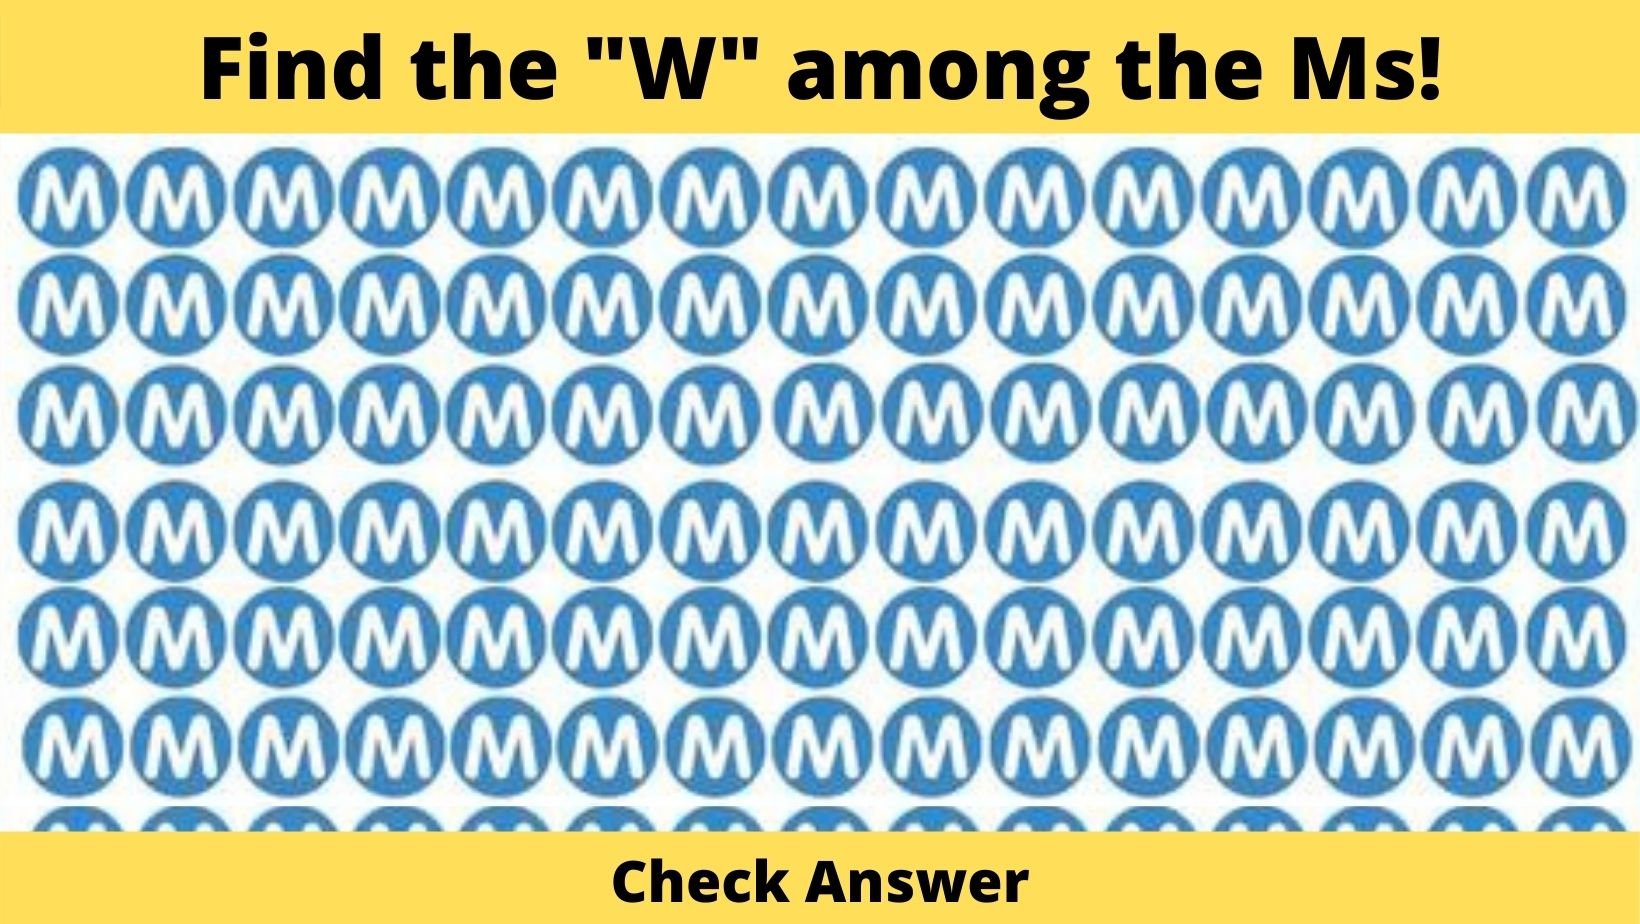 small joys thumbnail 2 5.jpg?resize=1200,630 - Only 7% Of The Population Can Find The "W" Among The Ms In Thirty Seconds, Are You One Of Them?